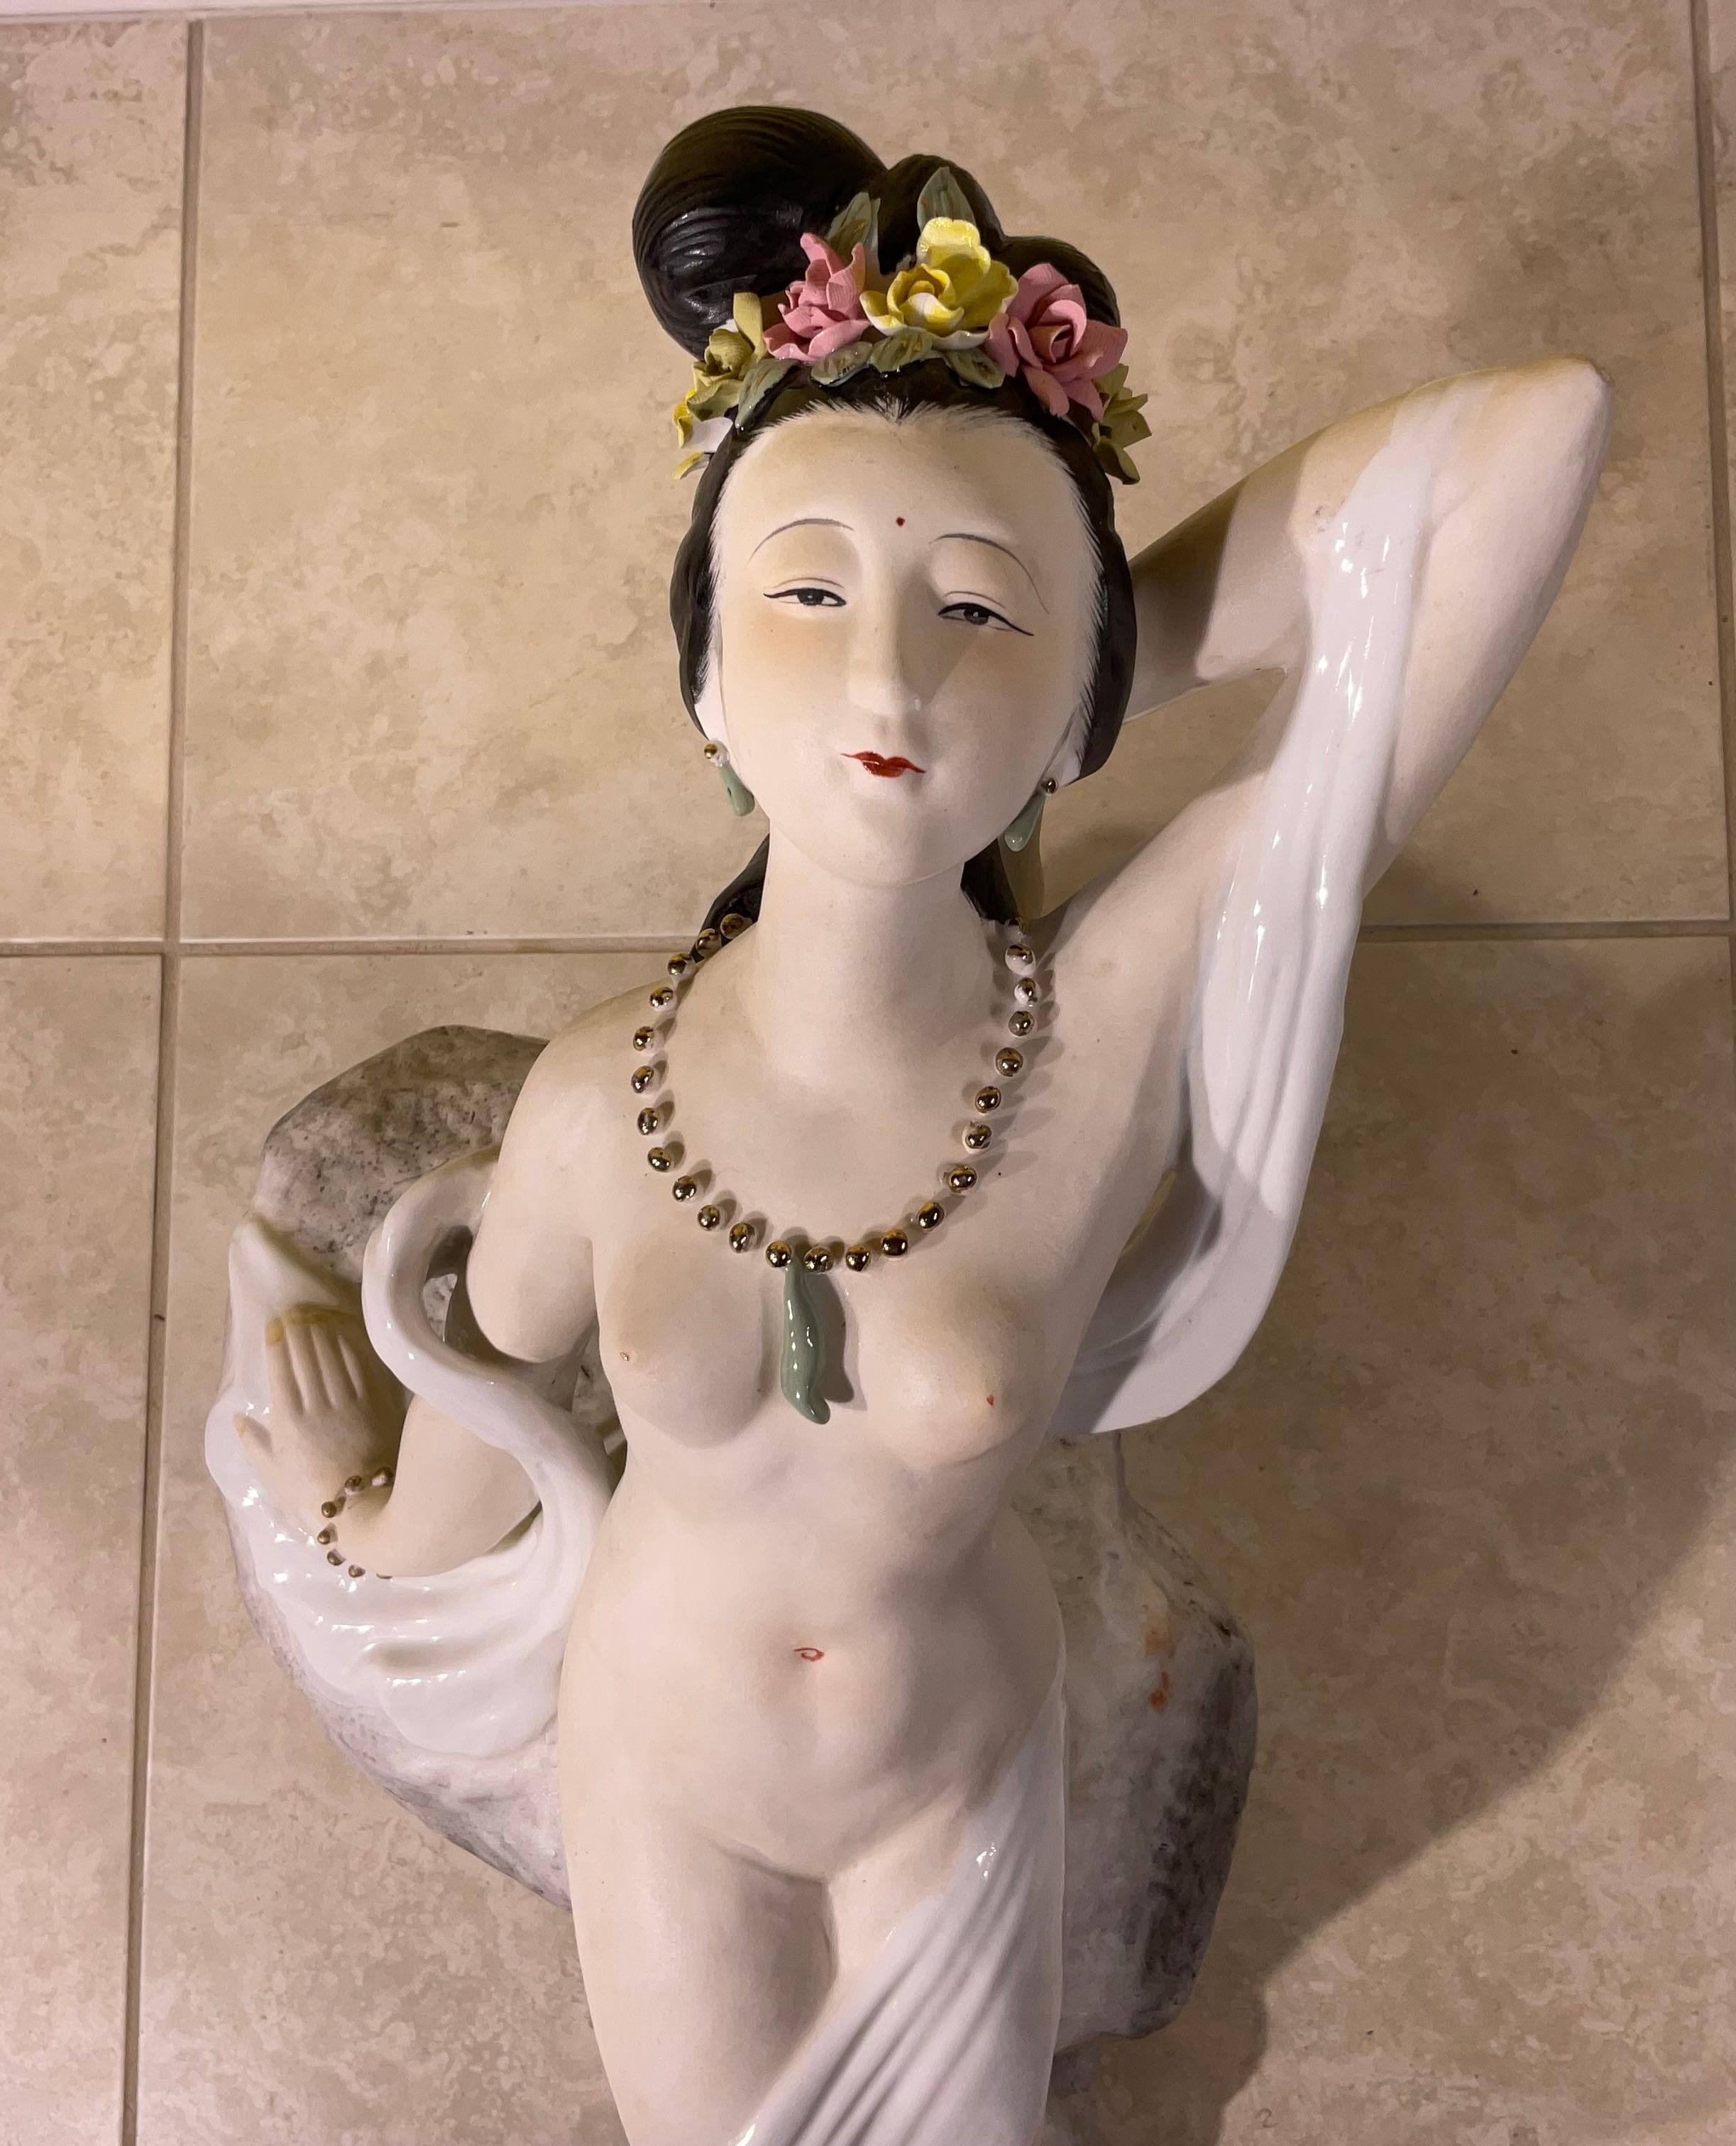 Beautiful oriental nude Porcelain woman figure, a decorative object of art made of porcelain , crafted with attention to detail, capturing the graceful curves and contours of the female form. The combination of porcelain and hand painted flowers